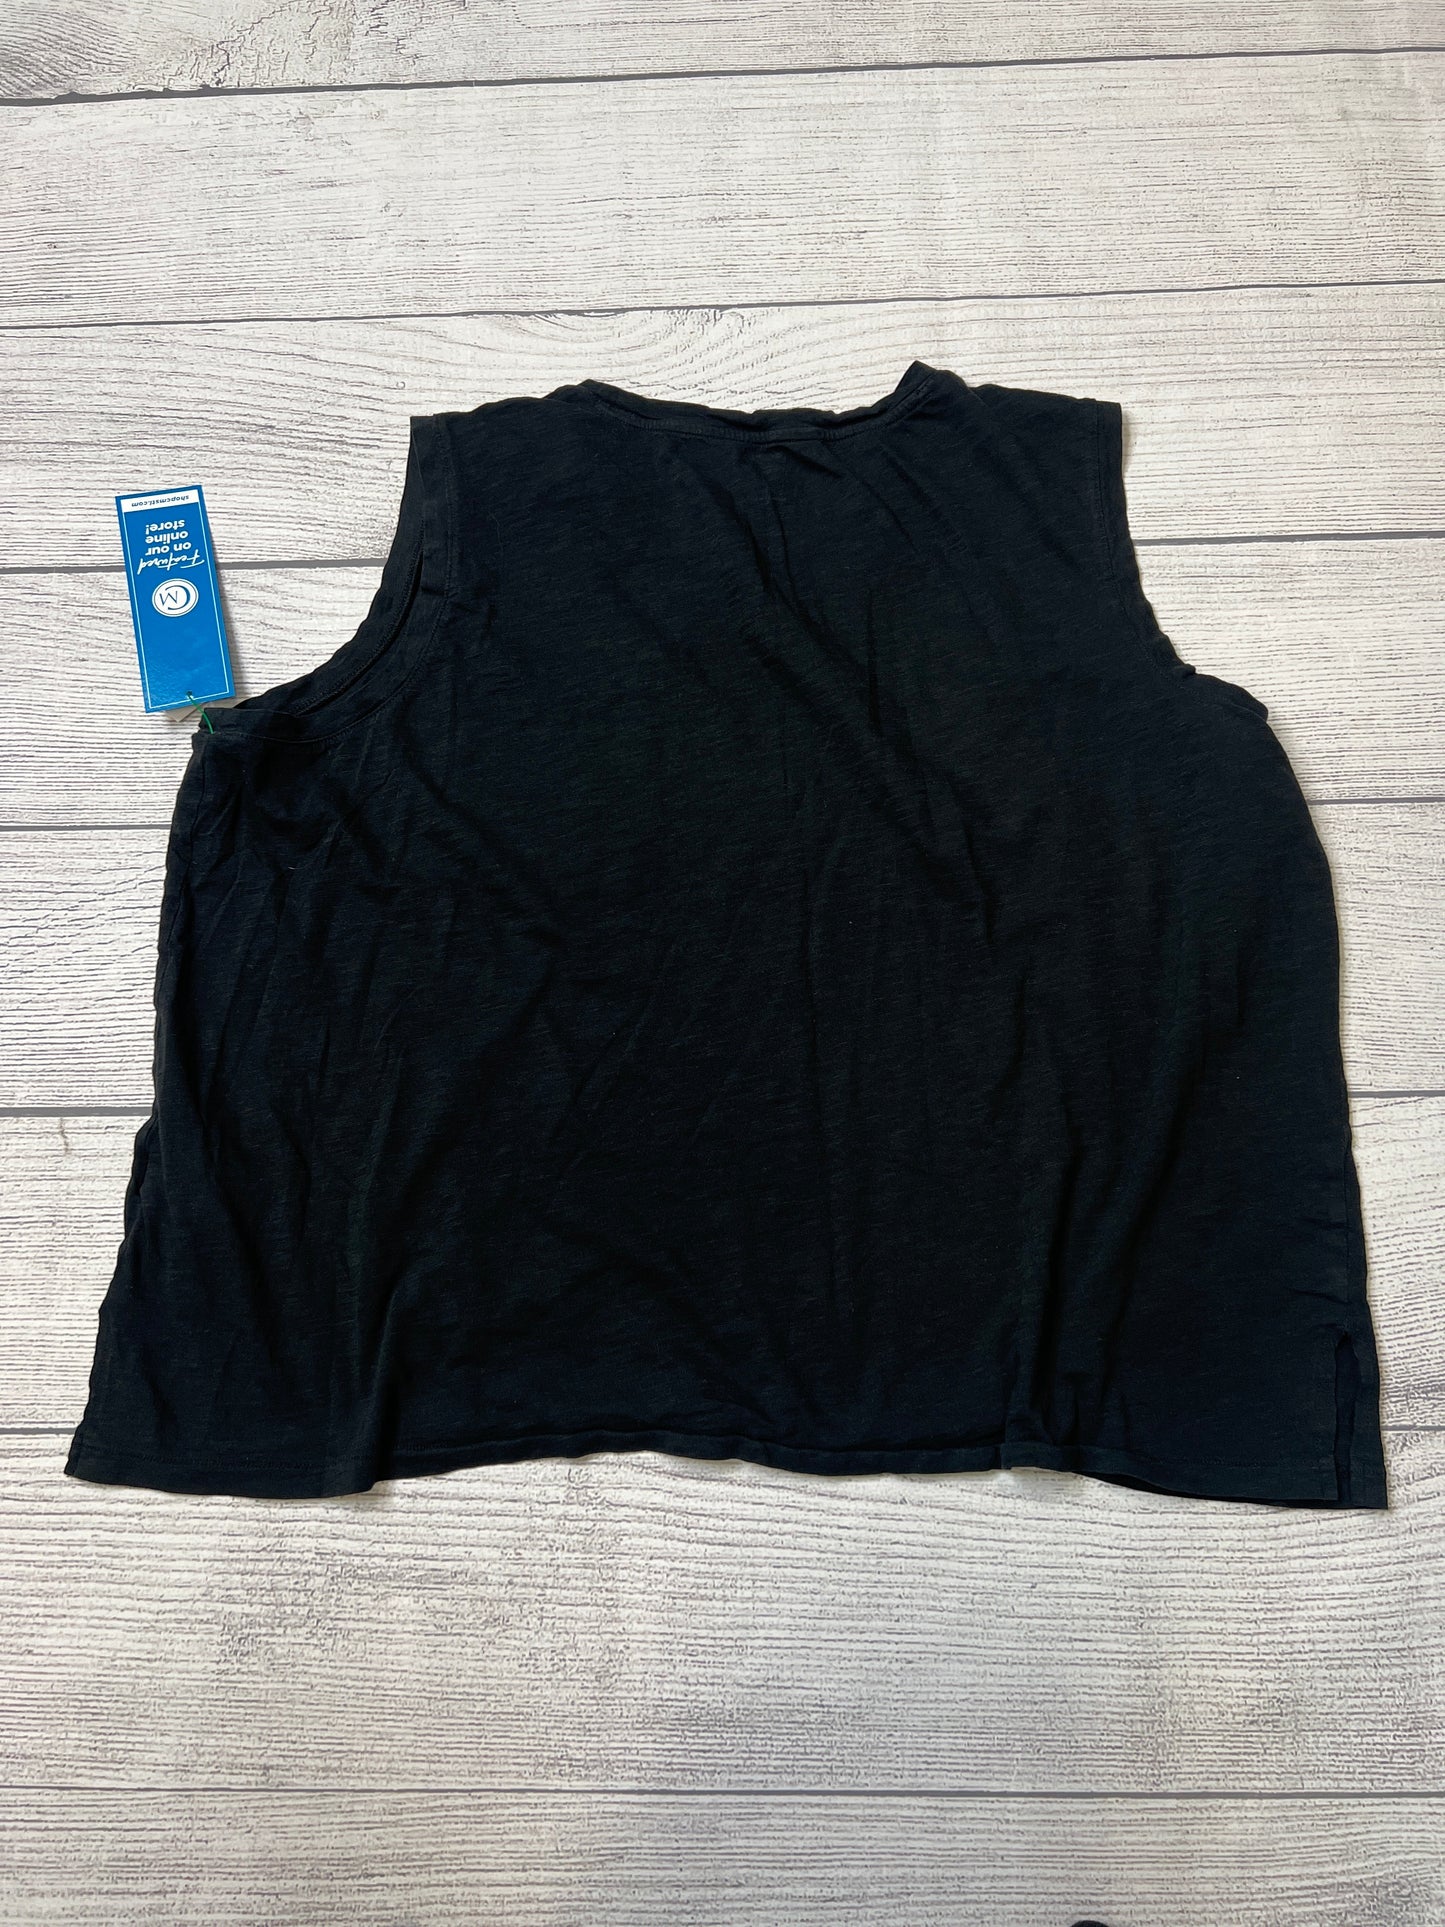 Top Sleeveless By Madewell  Size: 2x